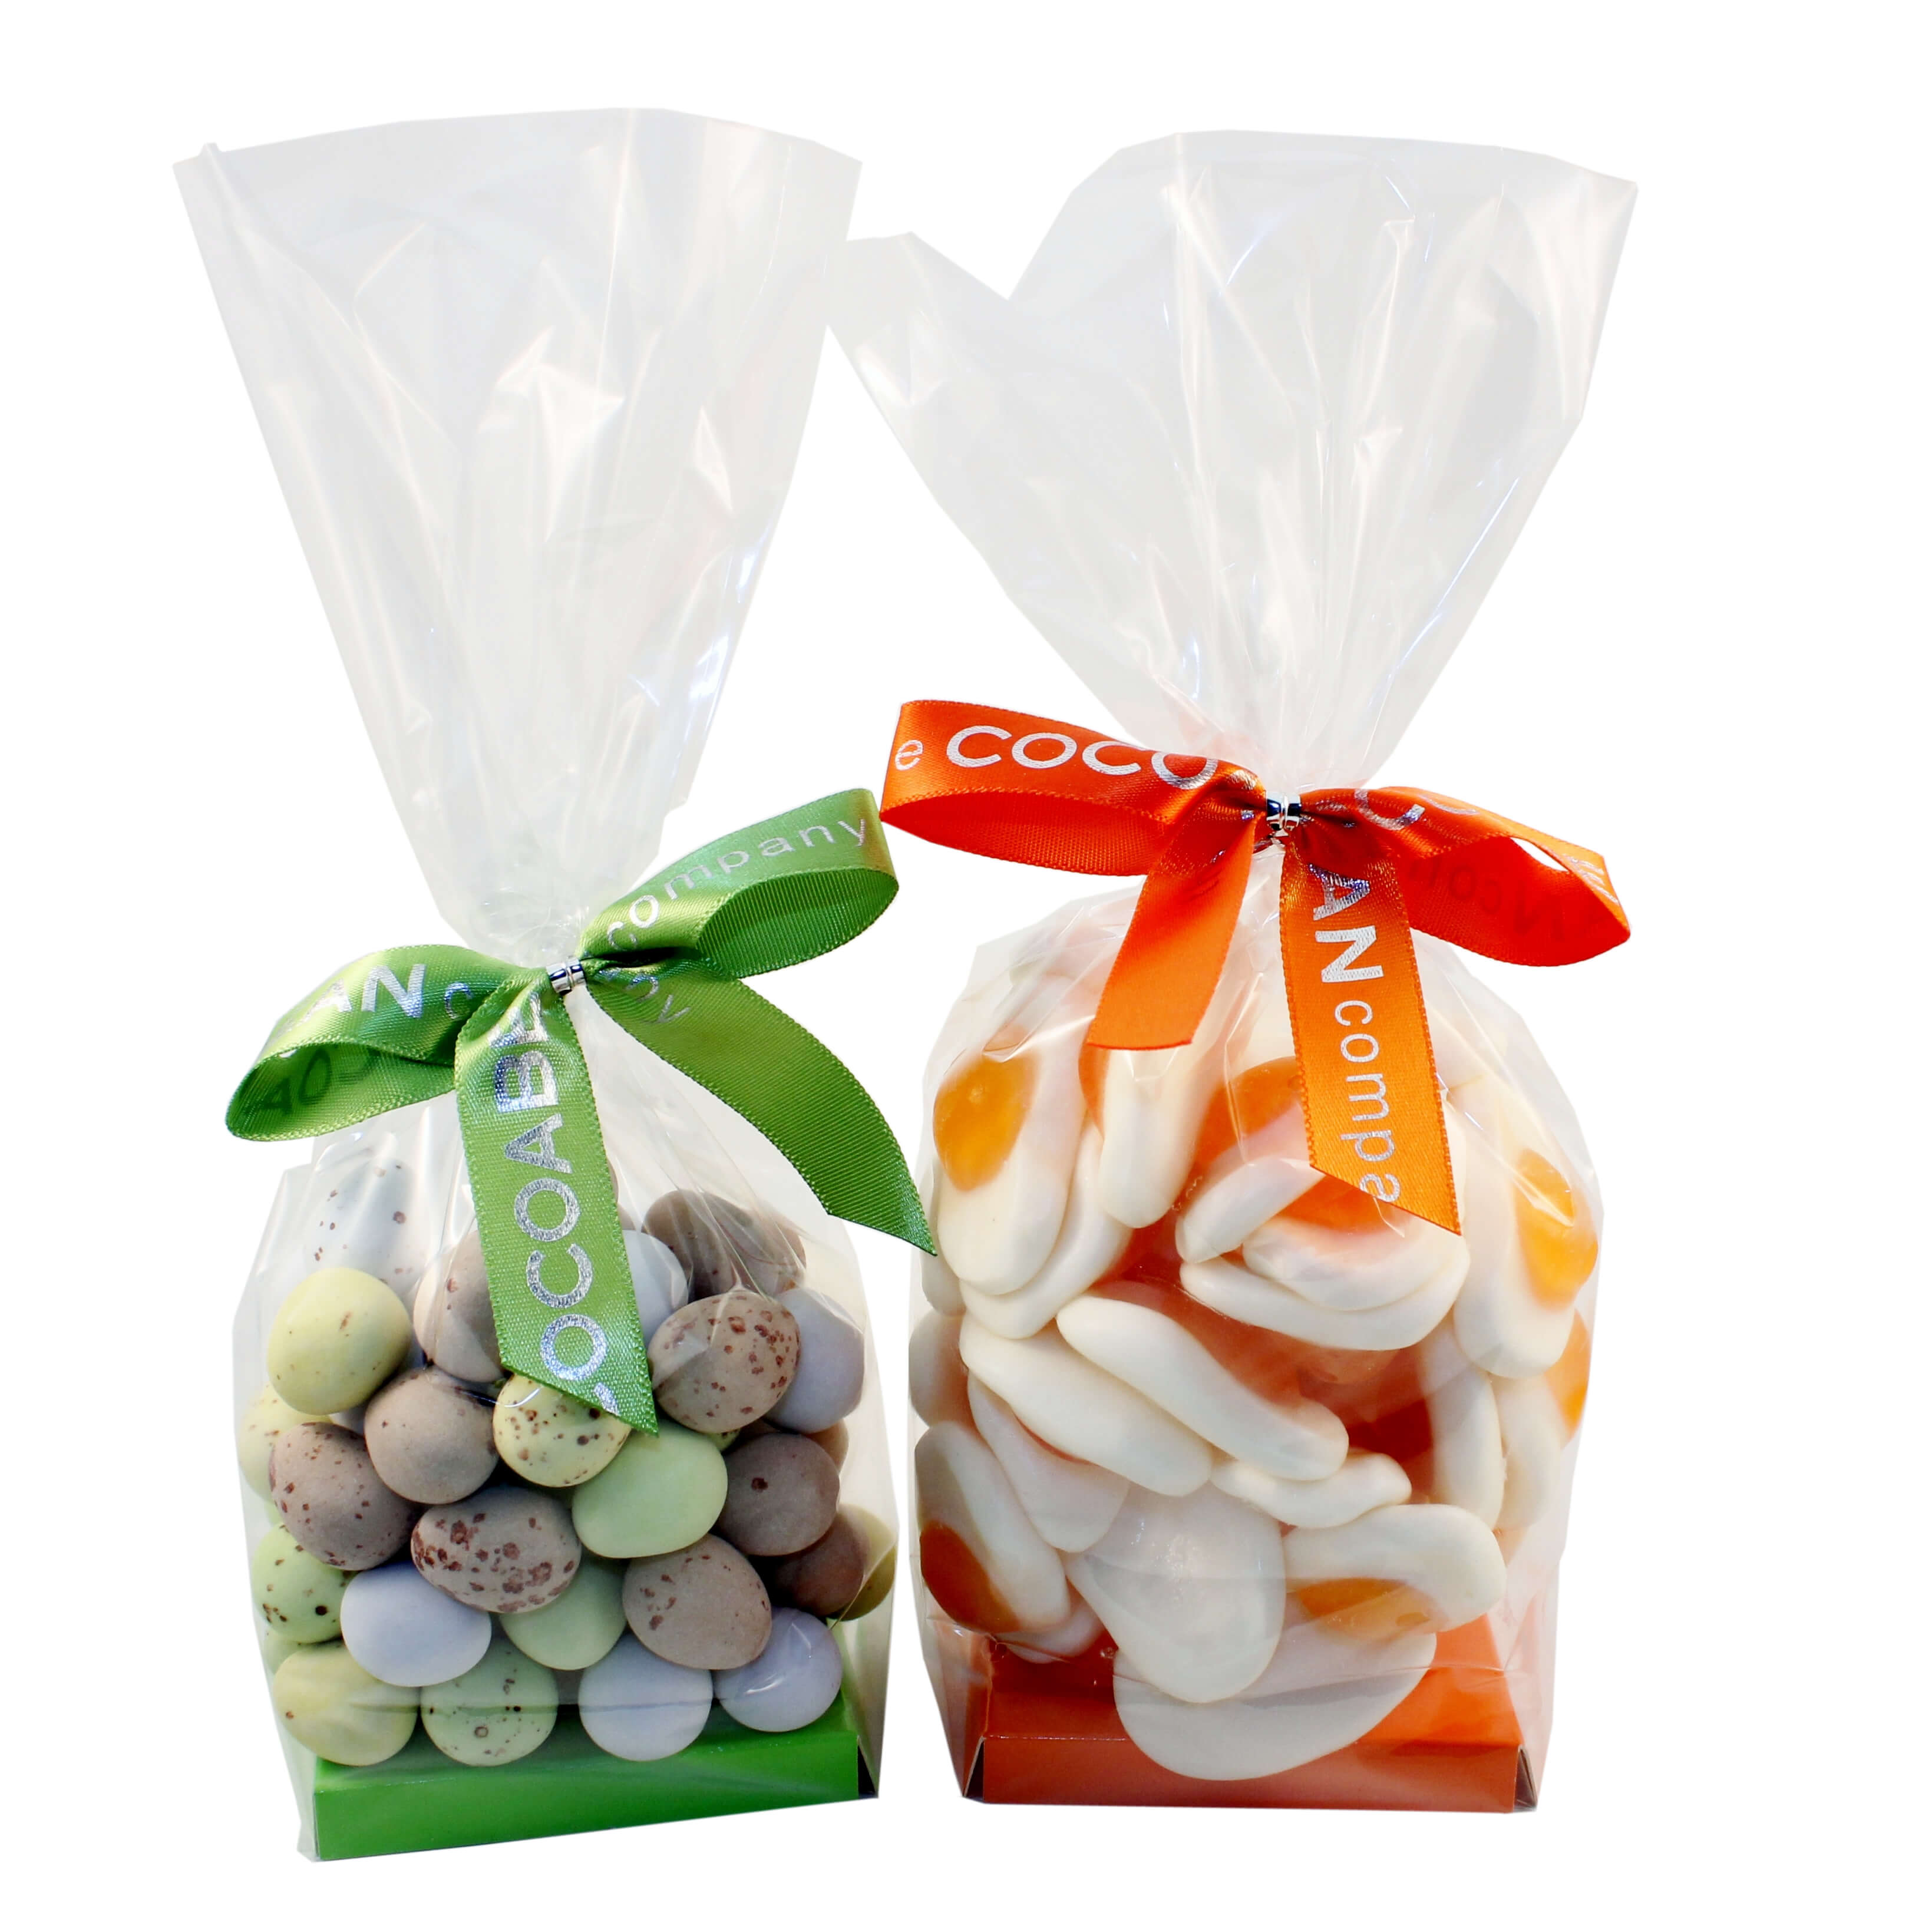 Bagged mini eggs and fried egg sweets